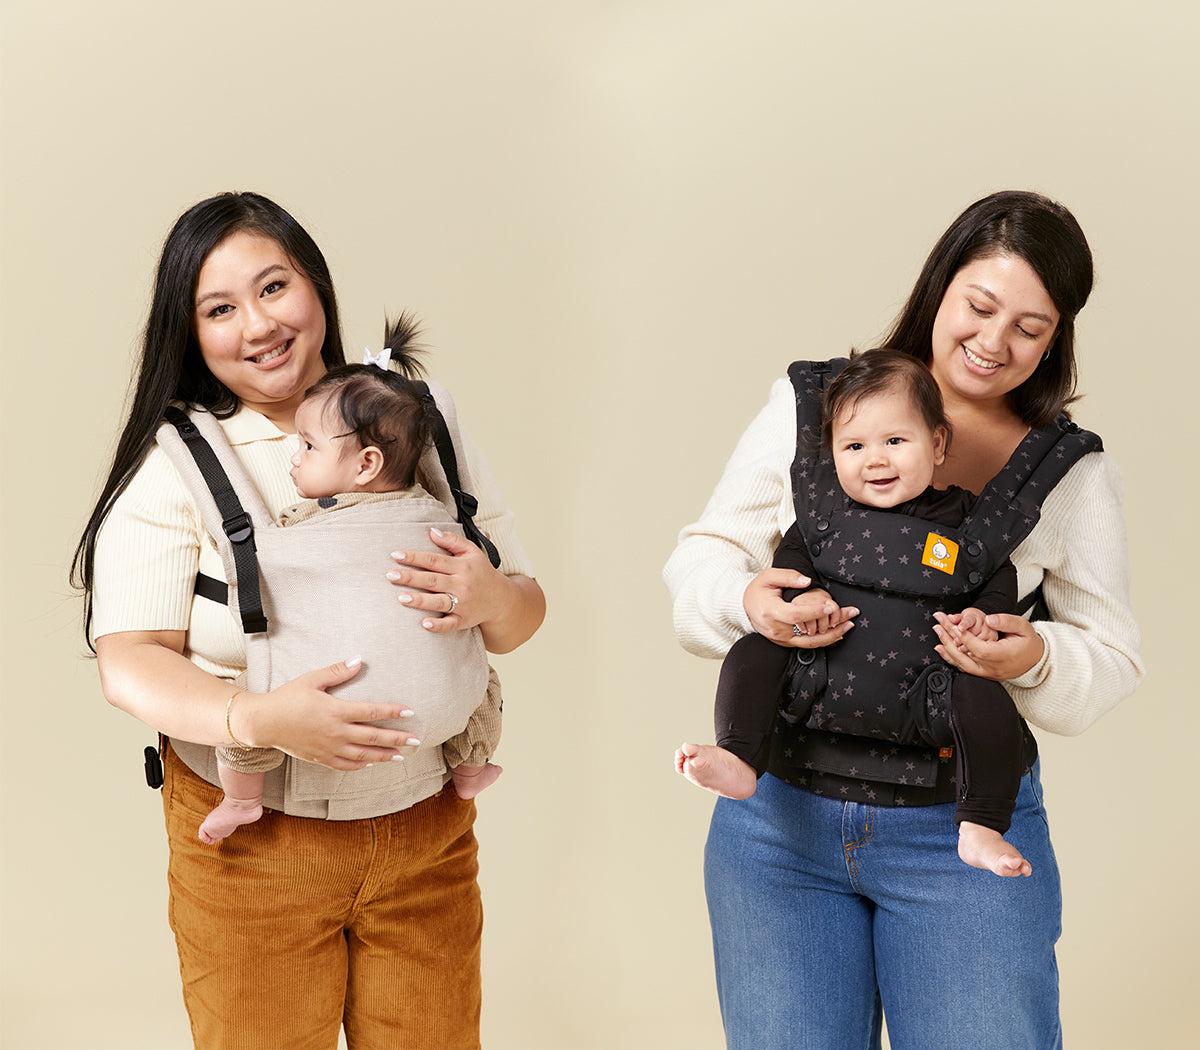 Joie Savvy baby carrier review - Baby carriers - Carriers & Slings